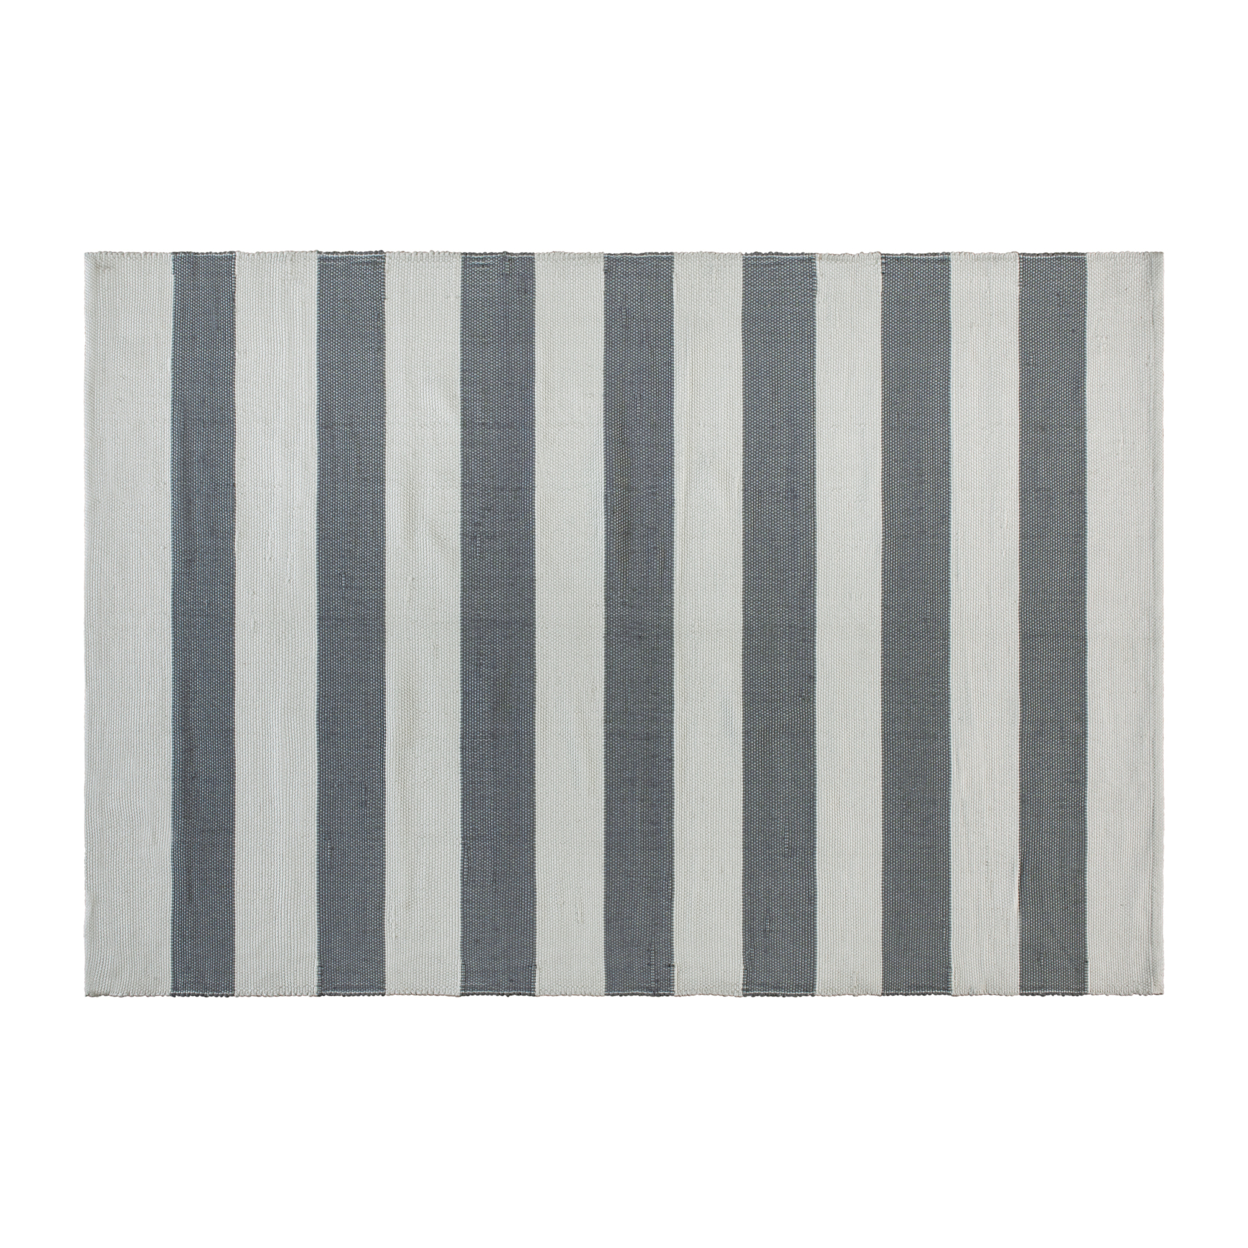 5' X 7' Grey & White Striped Handwoven Indoor Or Outdoor Cabana Style Stain Resistant Area Rug